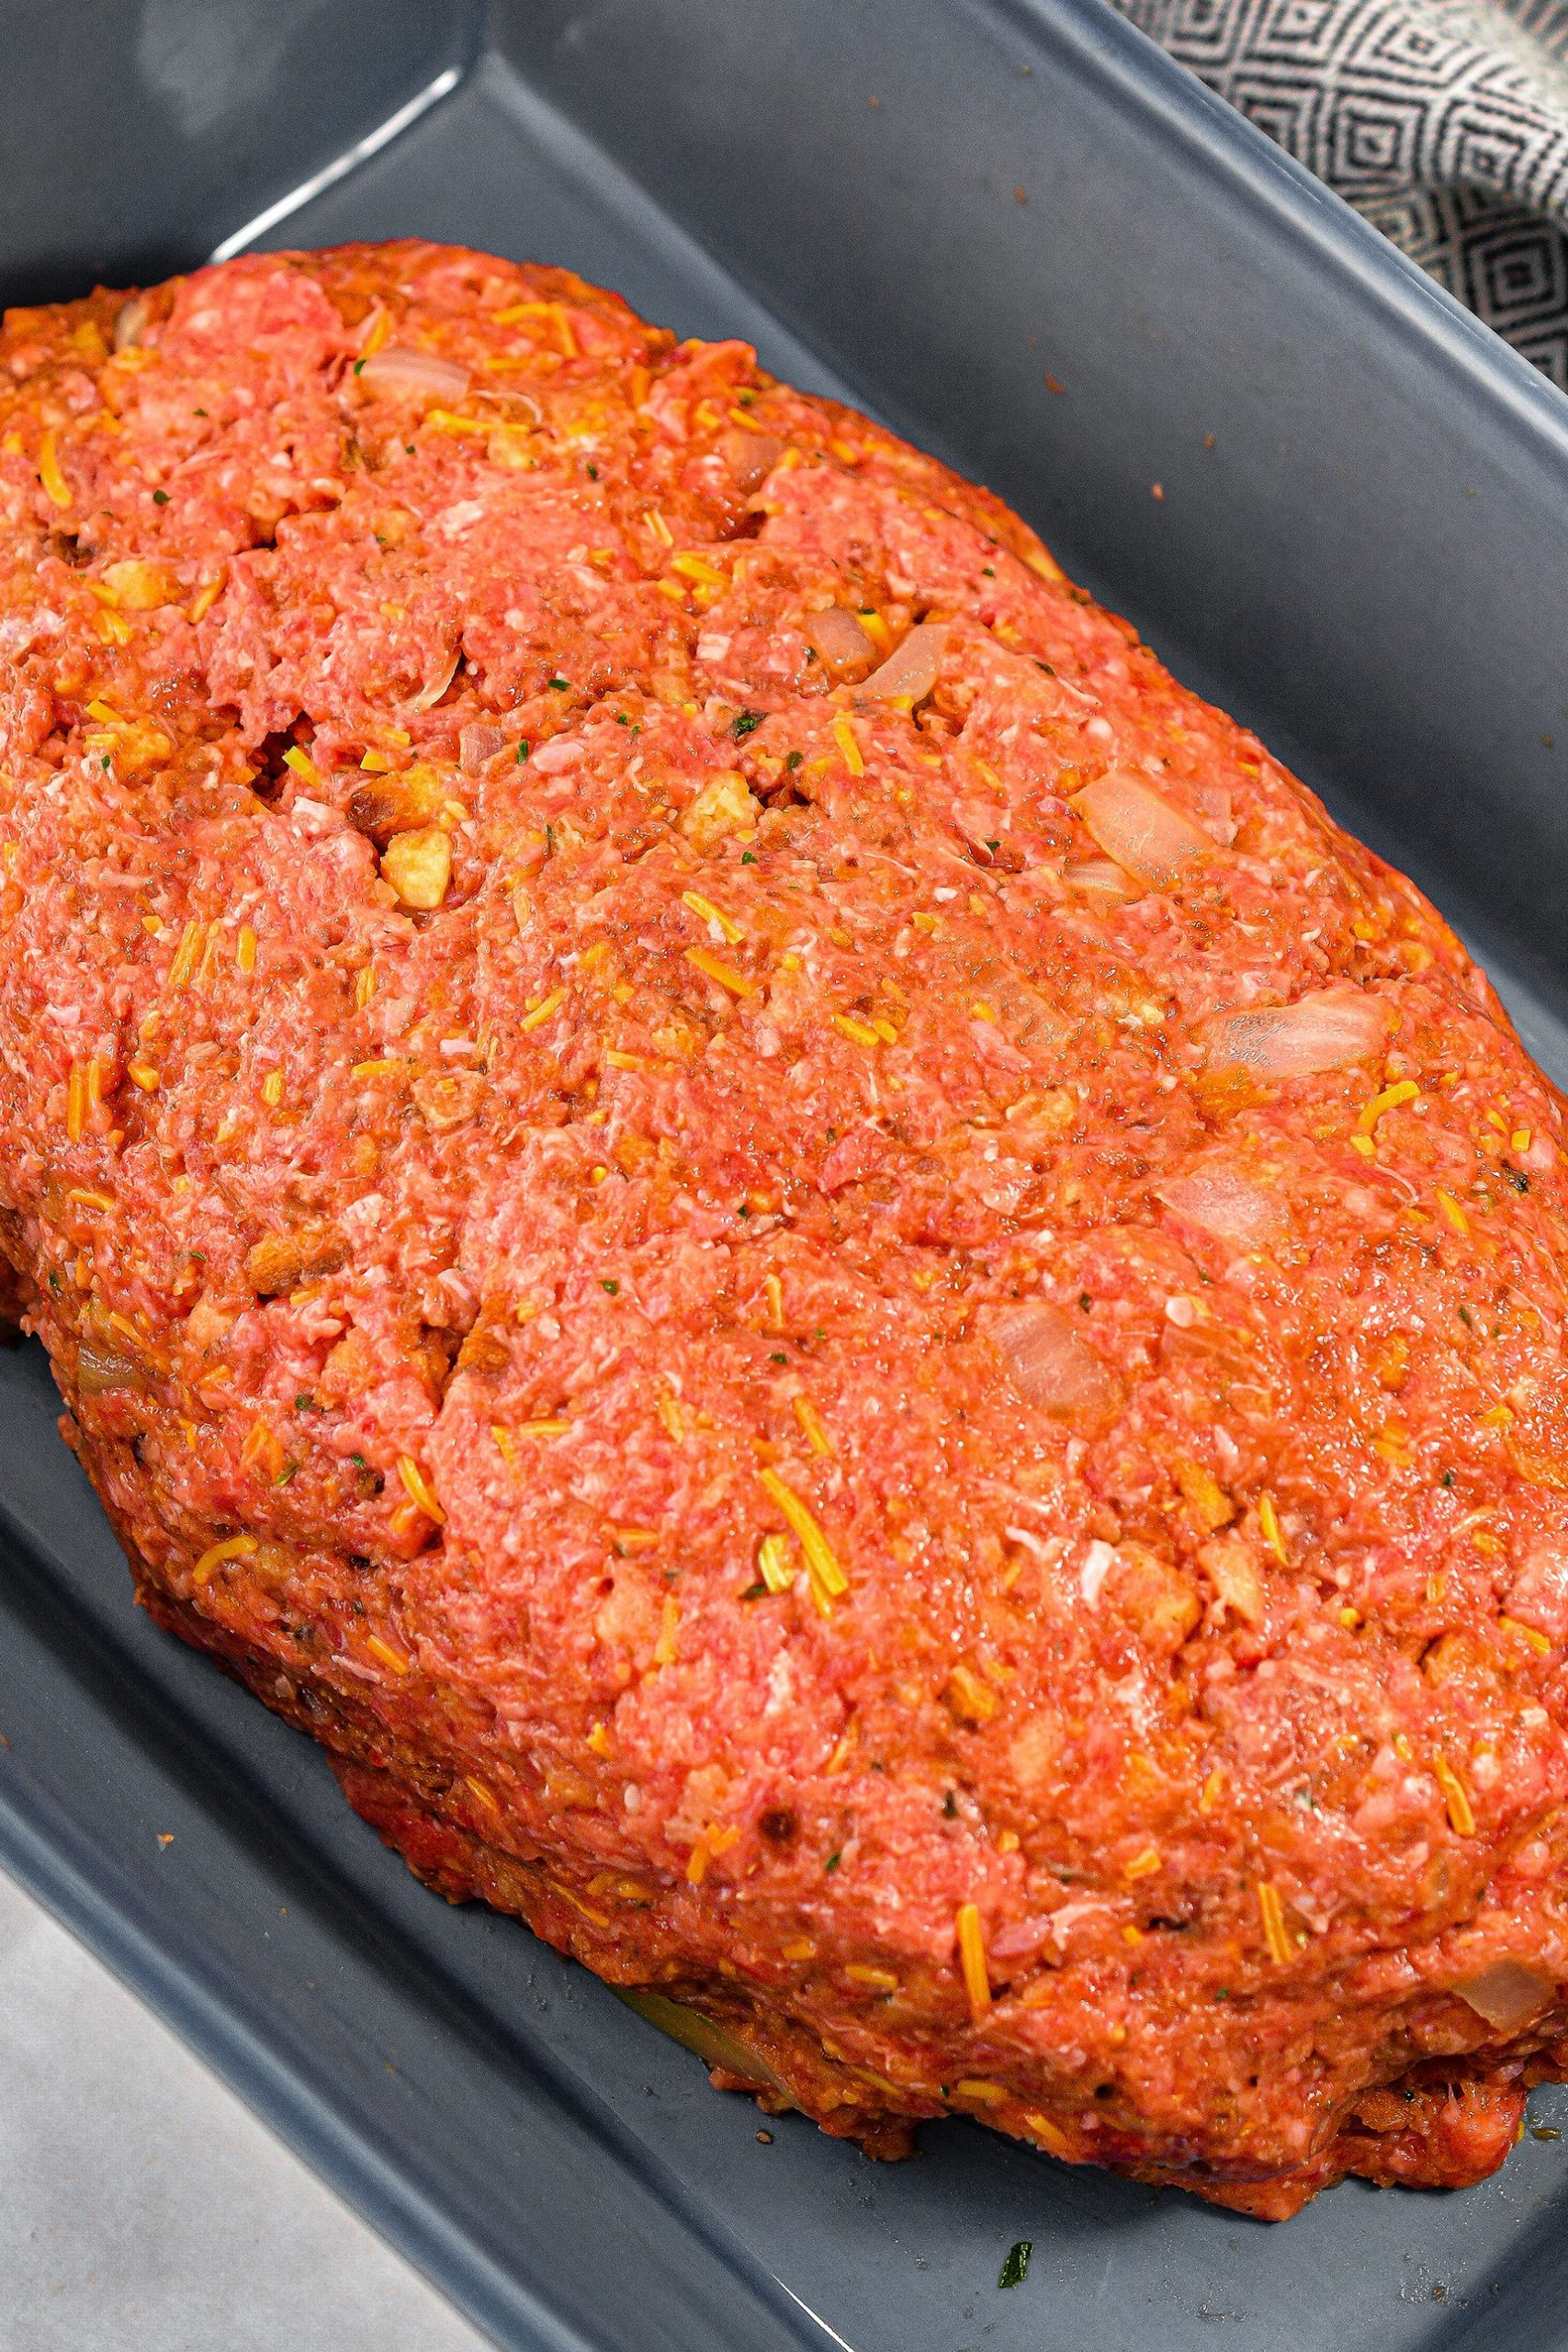 Form the meat mixture into a loaf shape in a 9x13 baking dish.